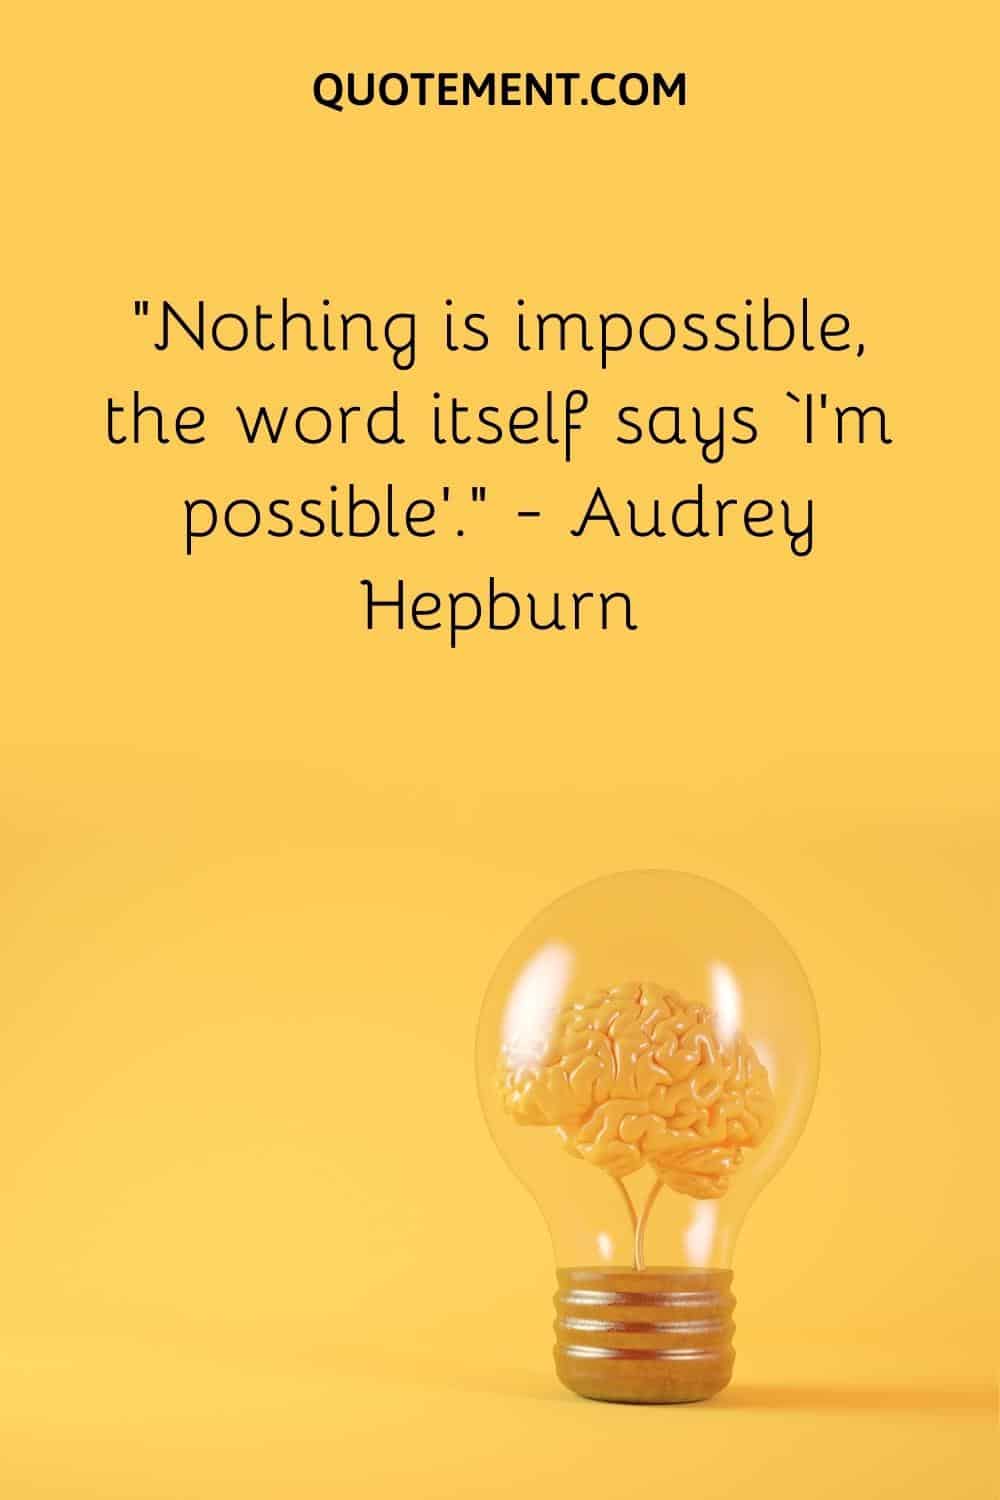 “Nothing is impossible, the word itself says ‘I’m possible’.” — Audrey Hepburn